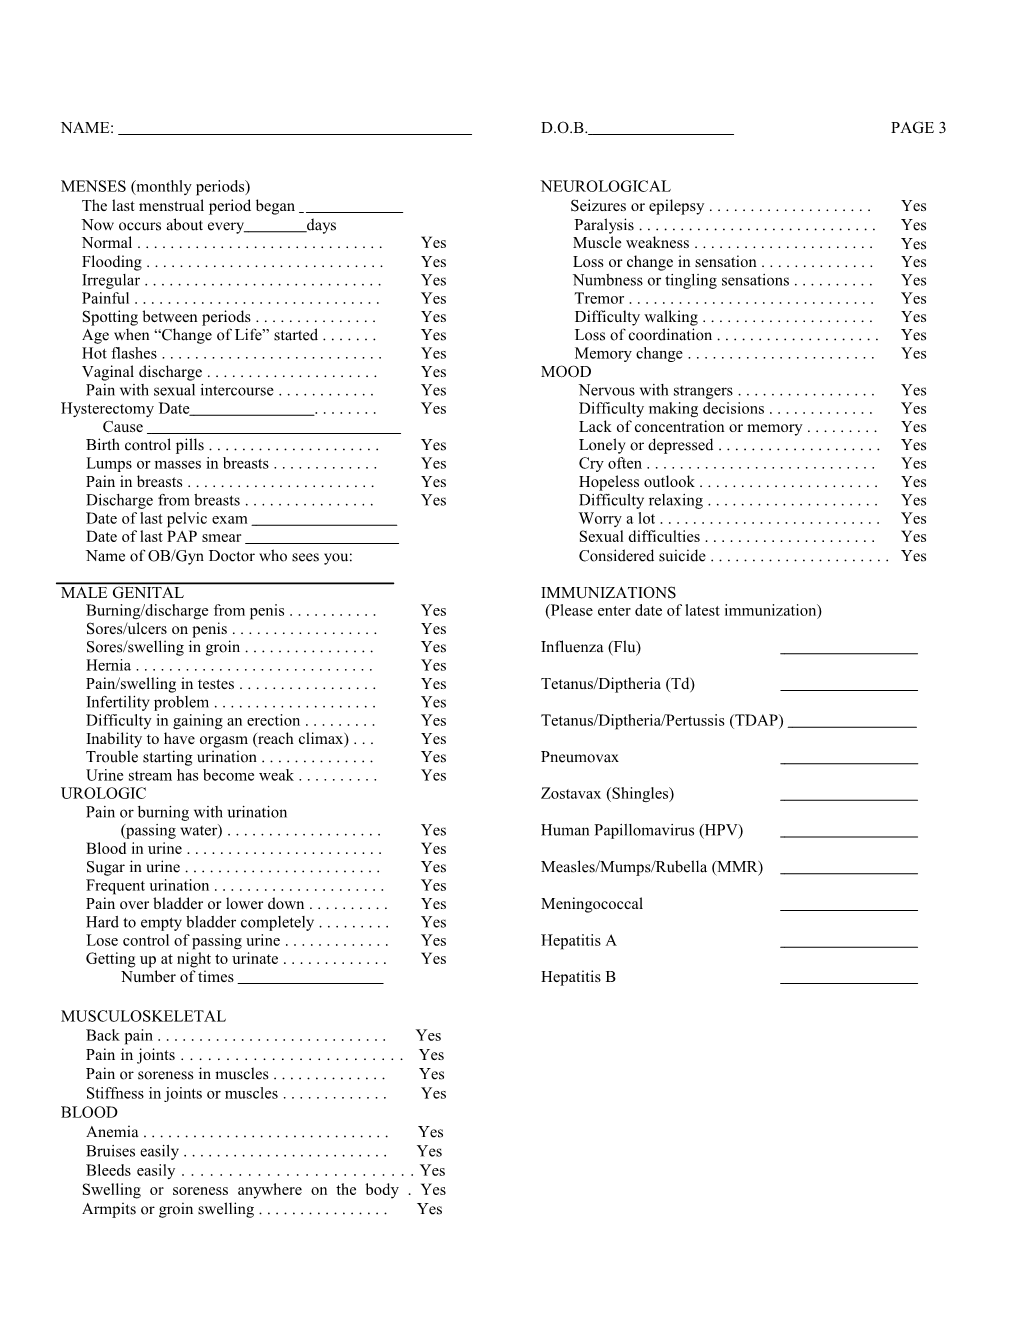 Patient S History and Health Questionnaire